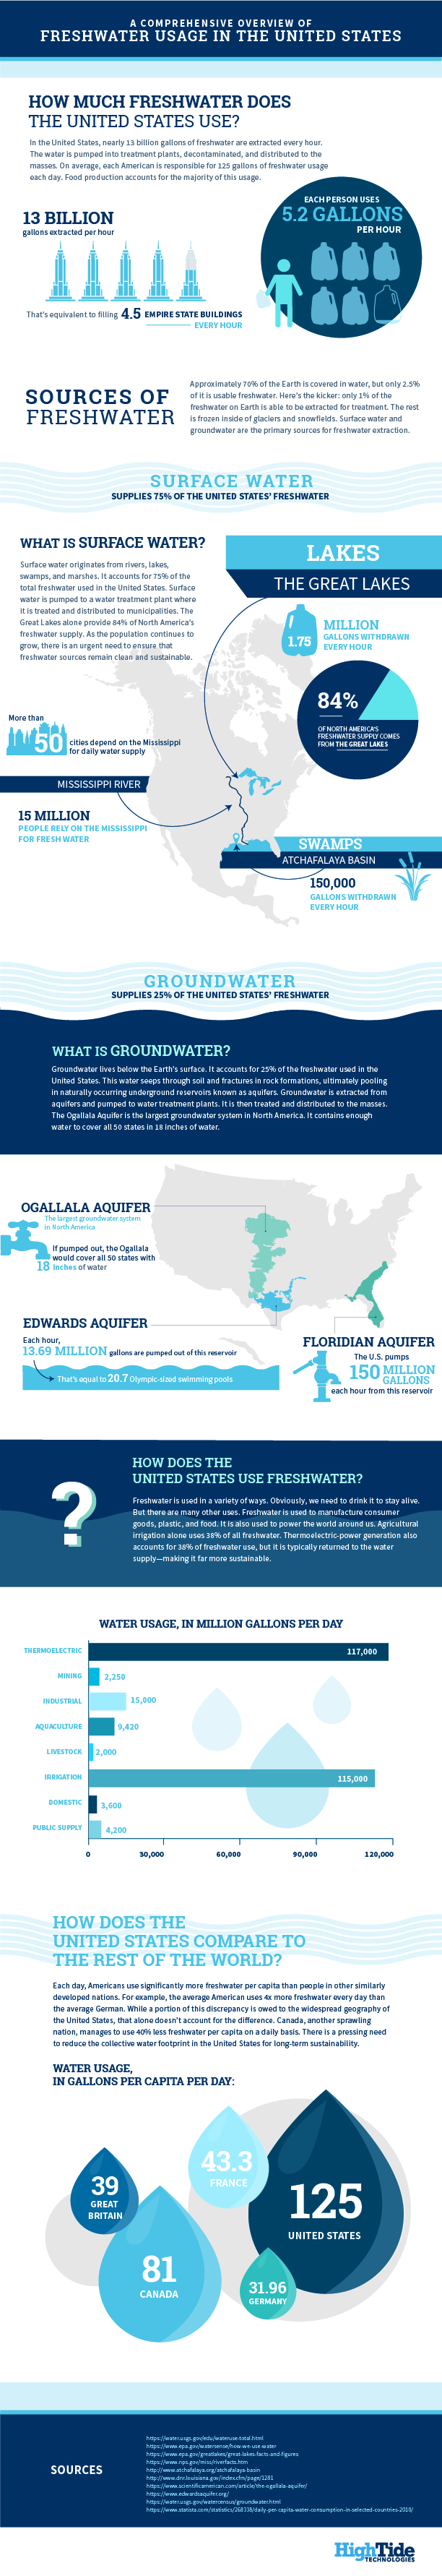 A Comprehensive Overview of Freshwater Usage in the United States